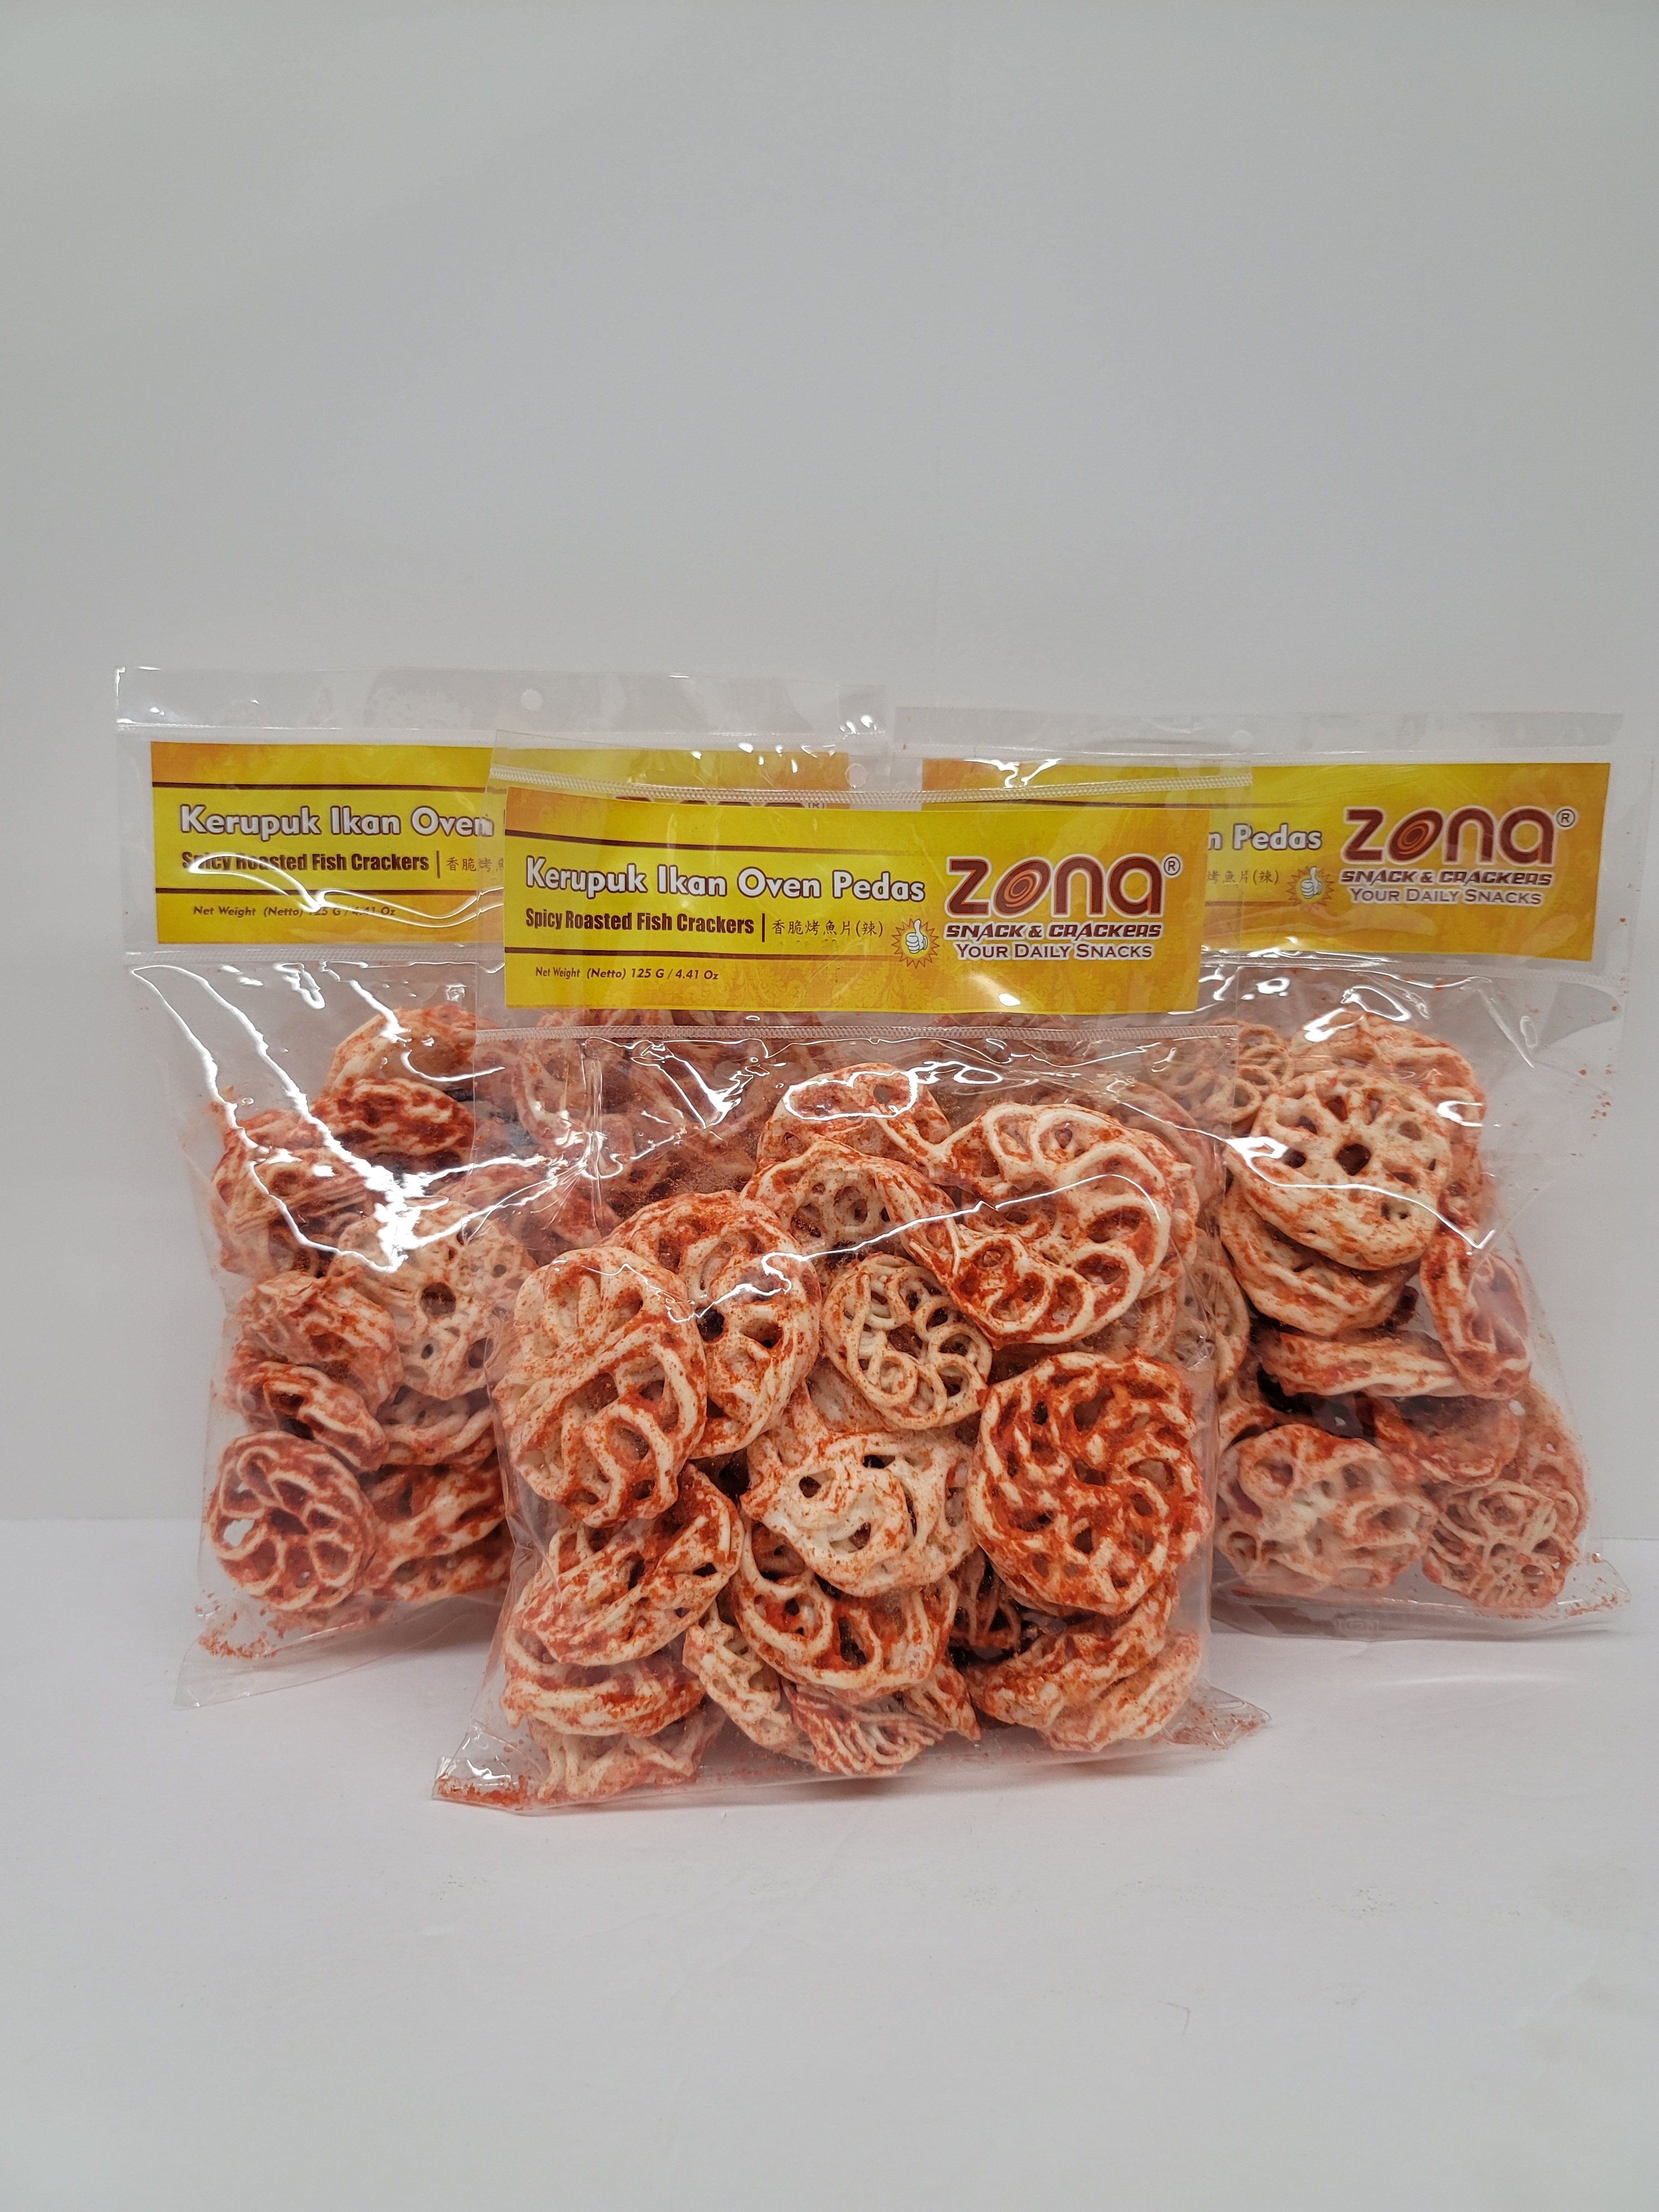 Zona Spicy Roasted Fish Crackers